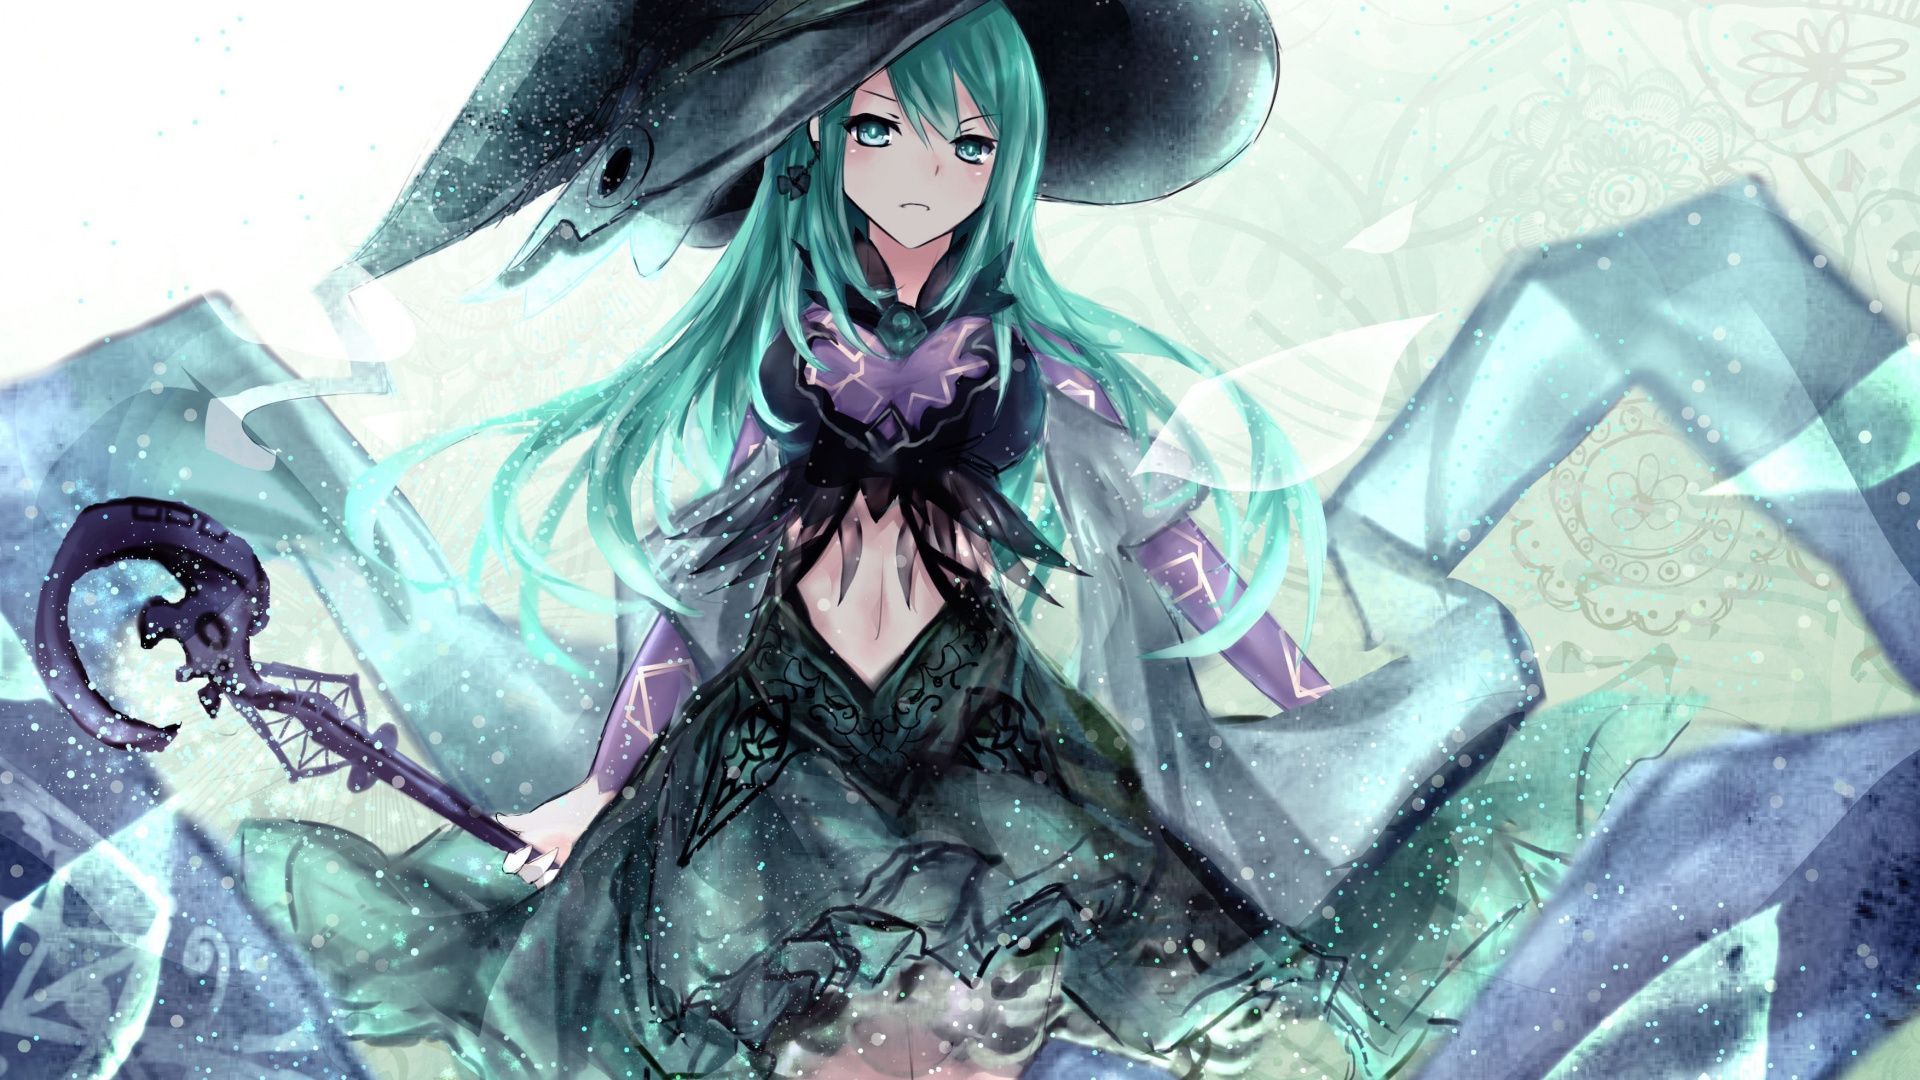 Download 1920x1080 wallpaper Witch, Natsumi, Date A Live, Full HD